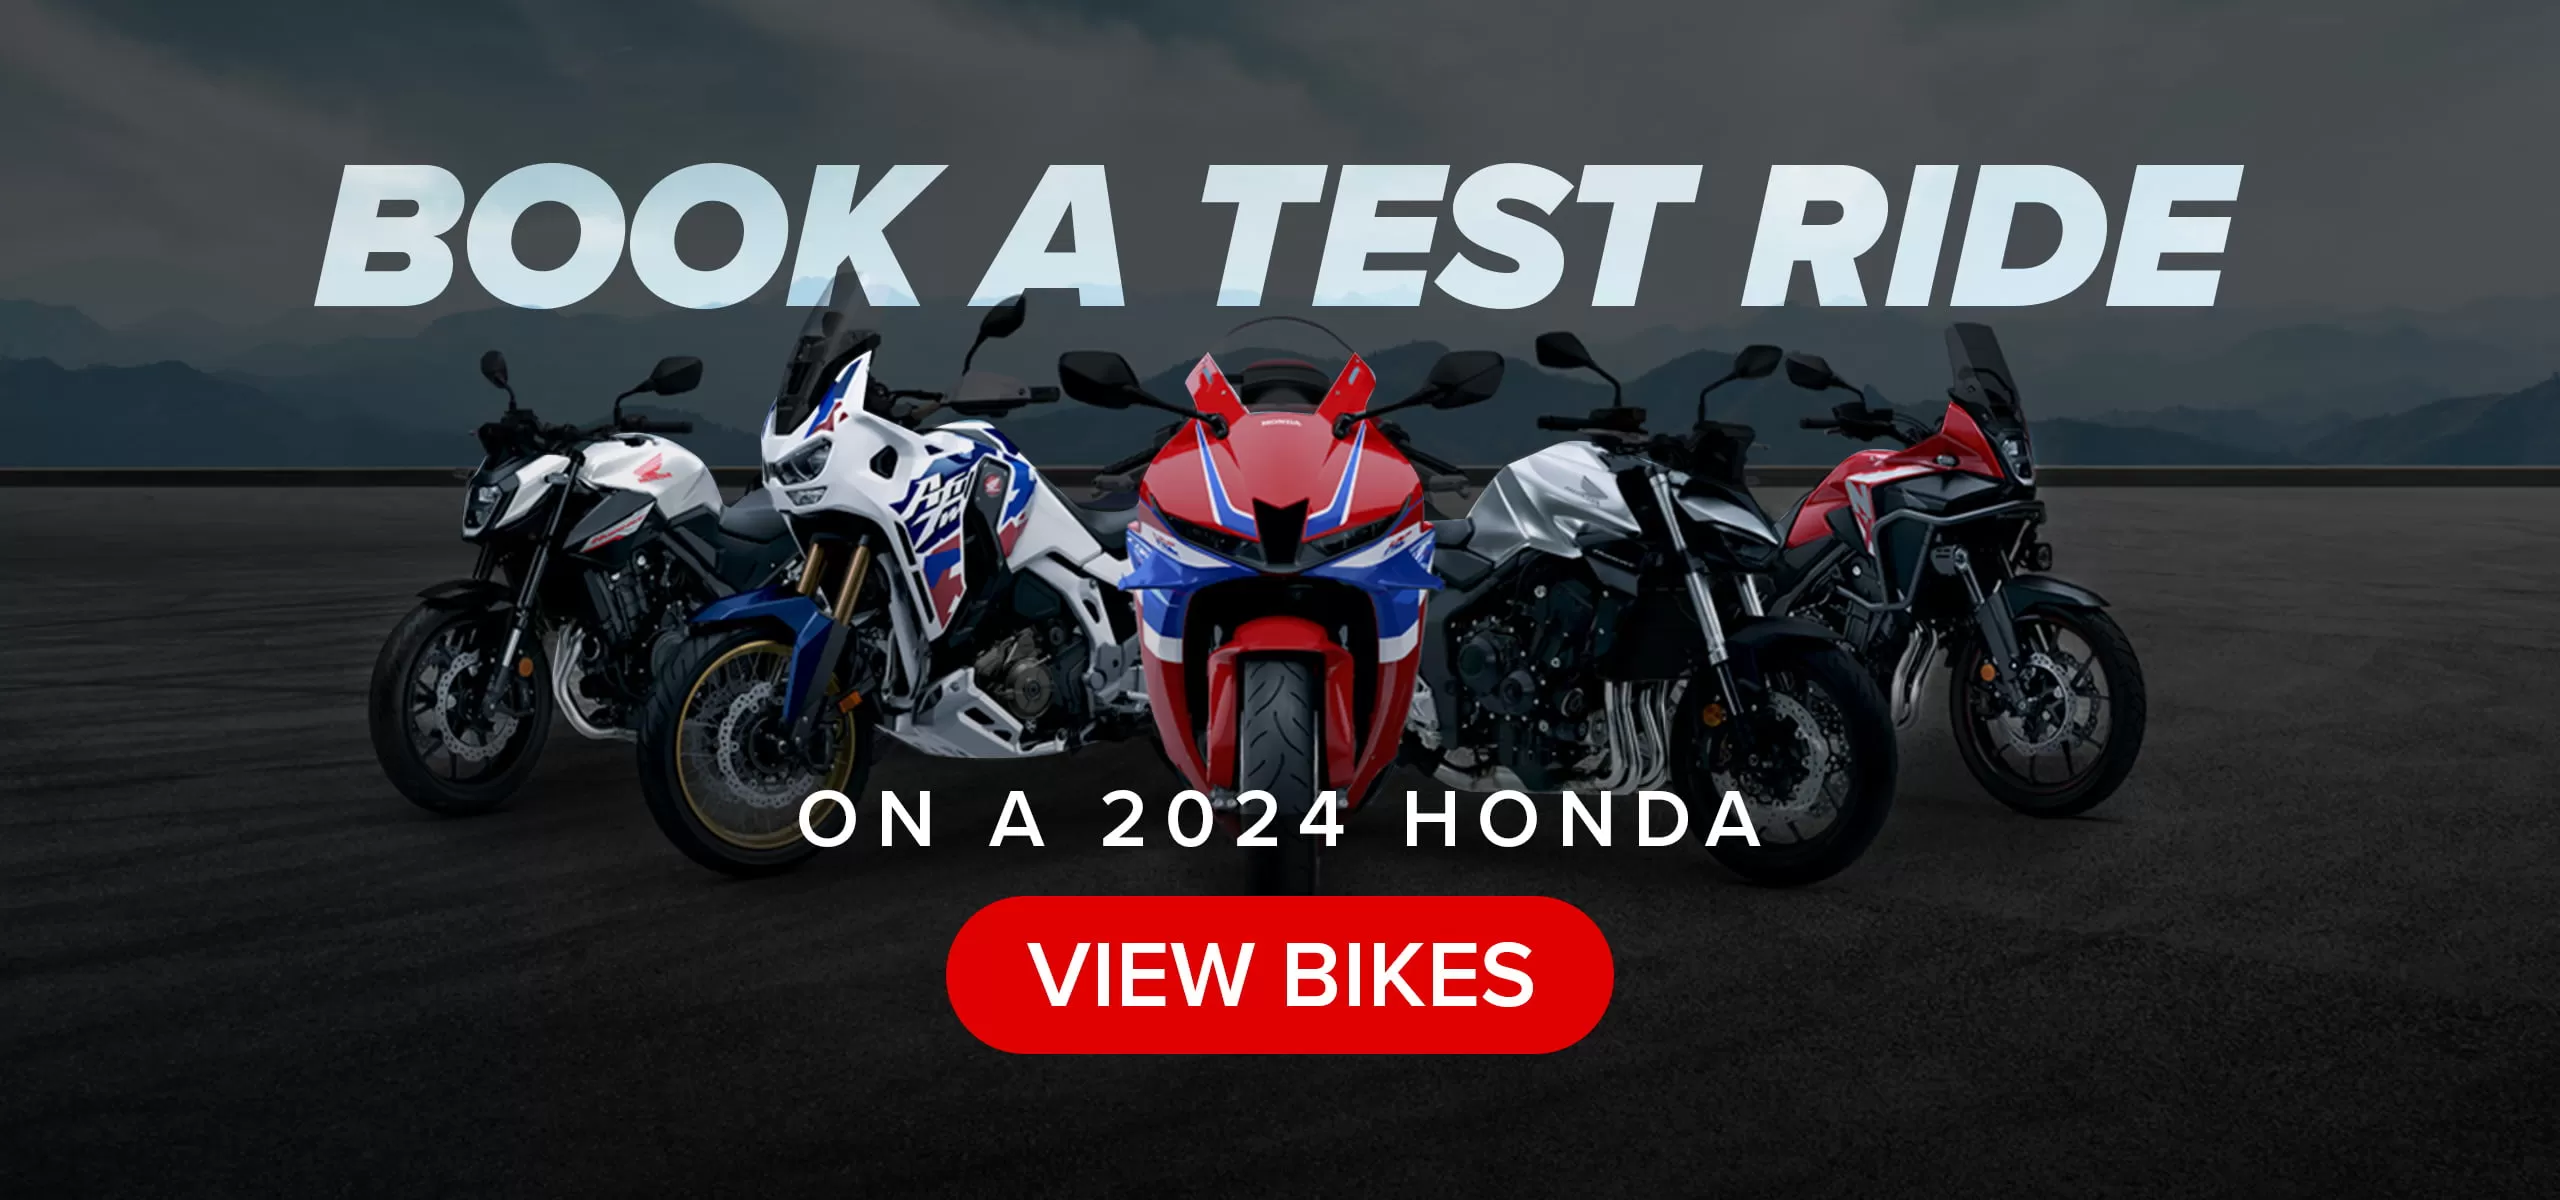 Book a test ride on a 2024 Honda with Doble Motorcycles